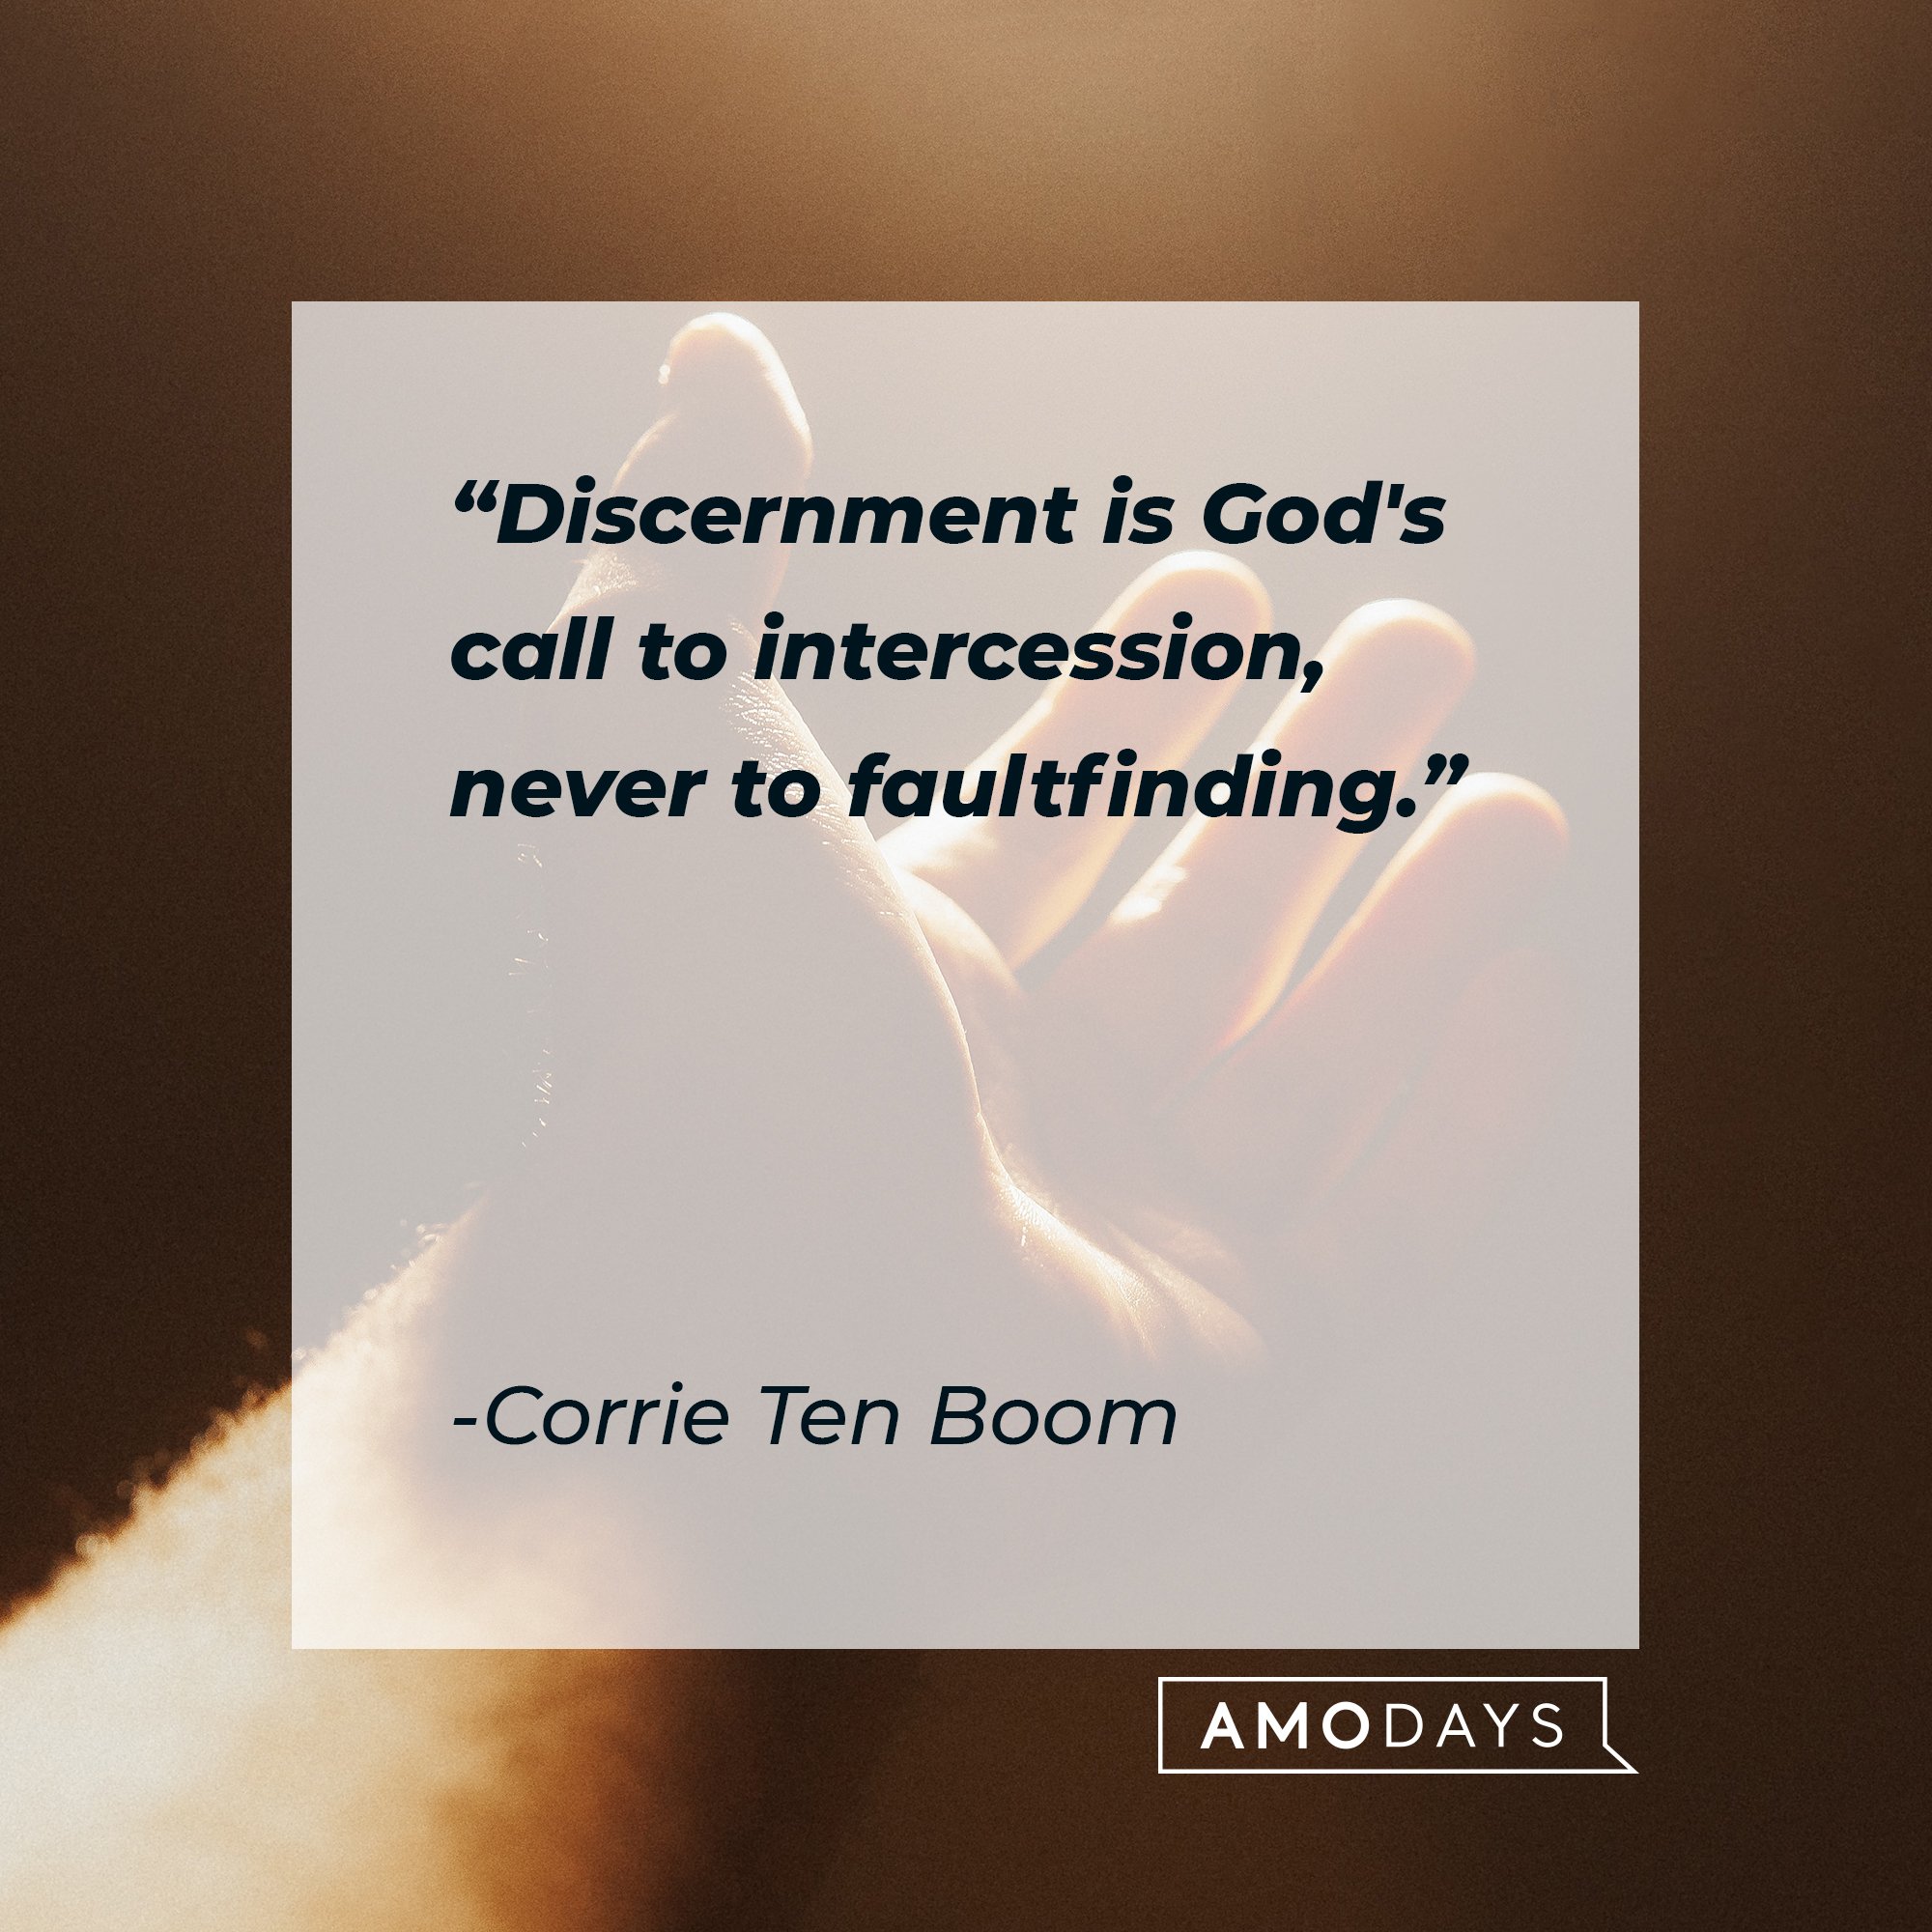 Corrie Ten Boom’s quote: "Discernment is God's call to intercession, never to faultfinding." | Image: AmoDays